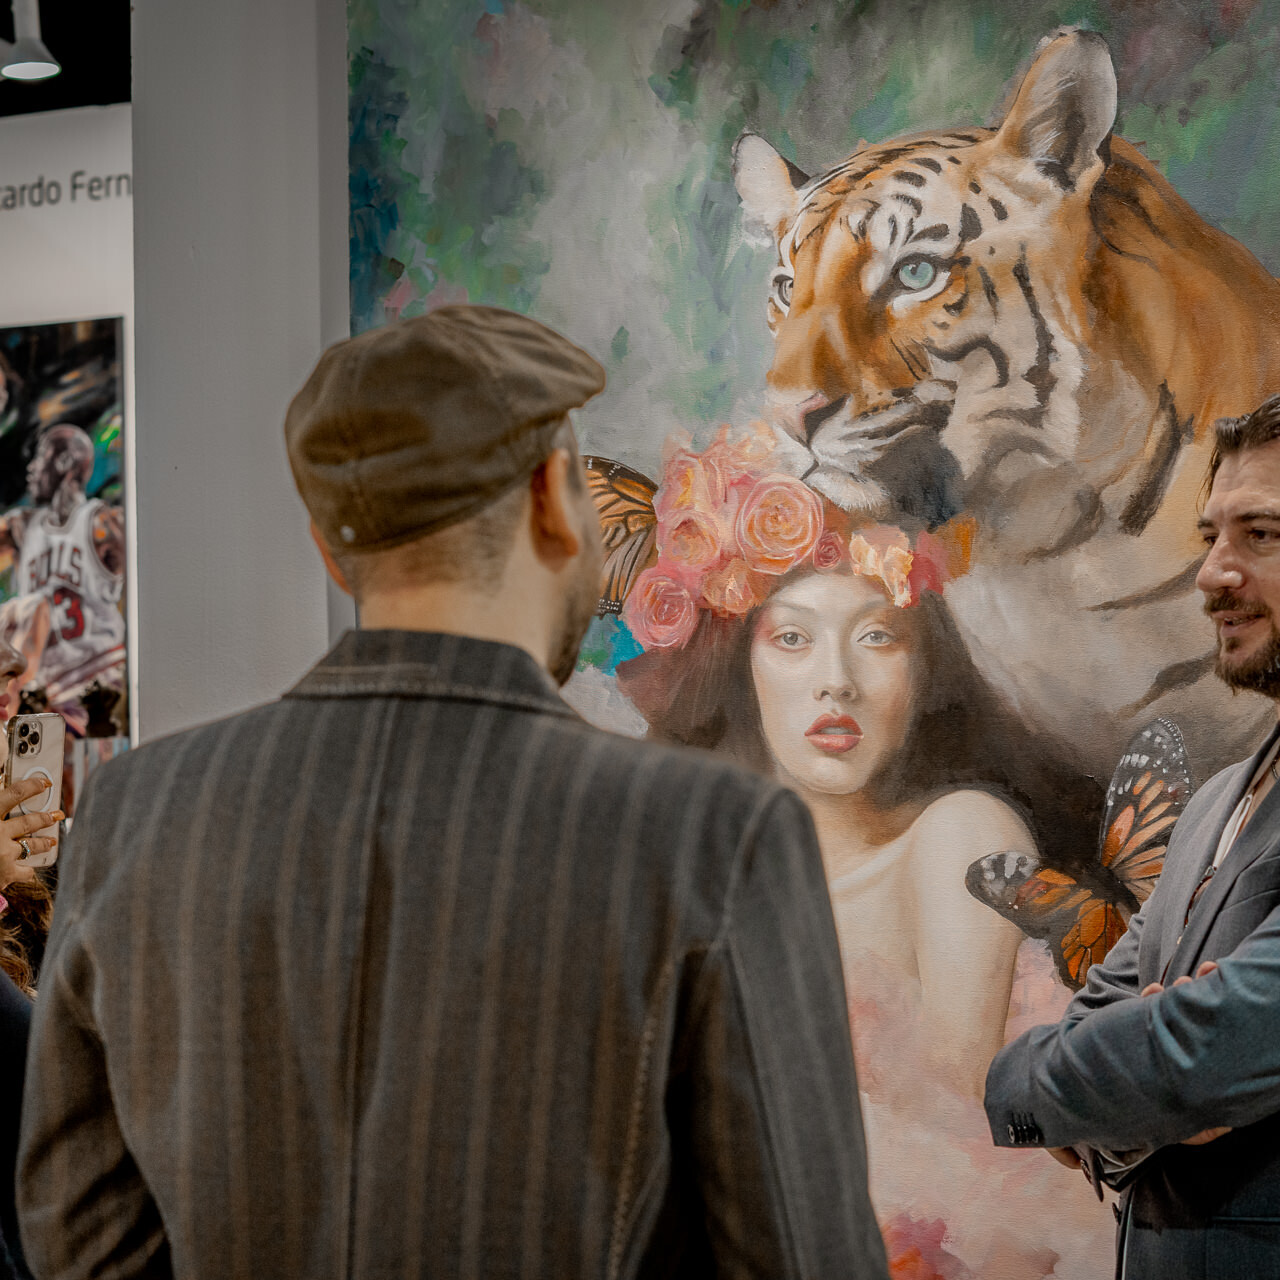 Alex Righetto speaks with two attendees at Miami Art Week, explaining the inspiration behind his painting 'The Guardian'.